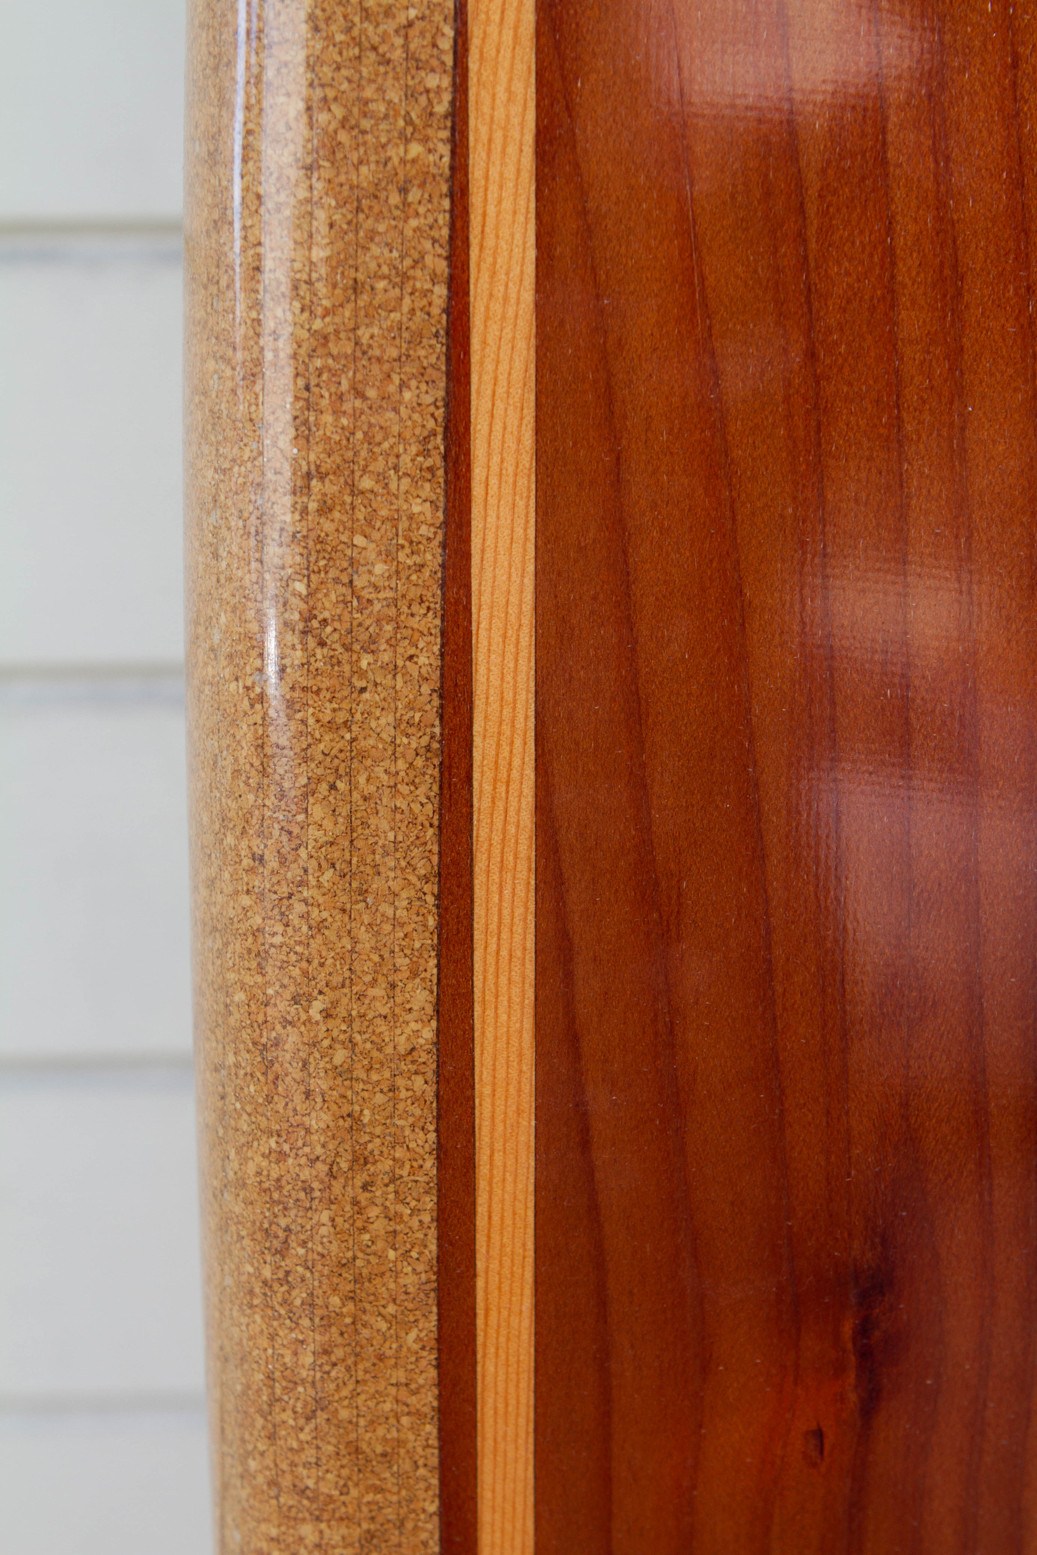 Surfboard - Hollow Redwood SUP